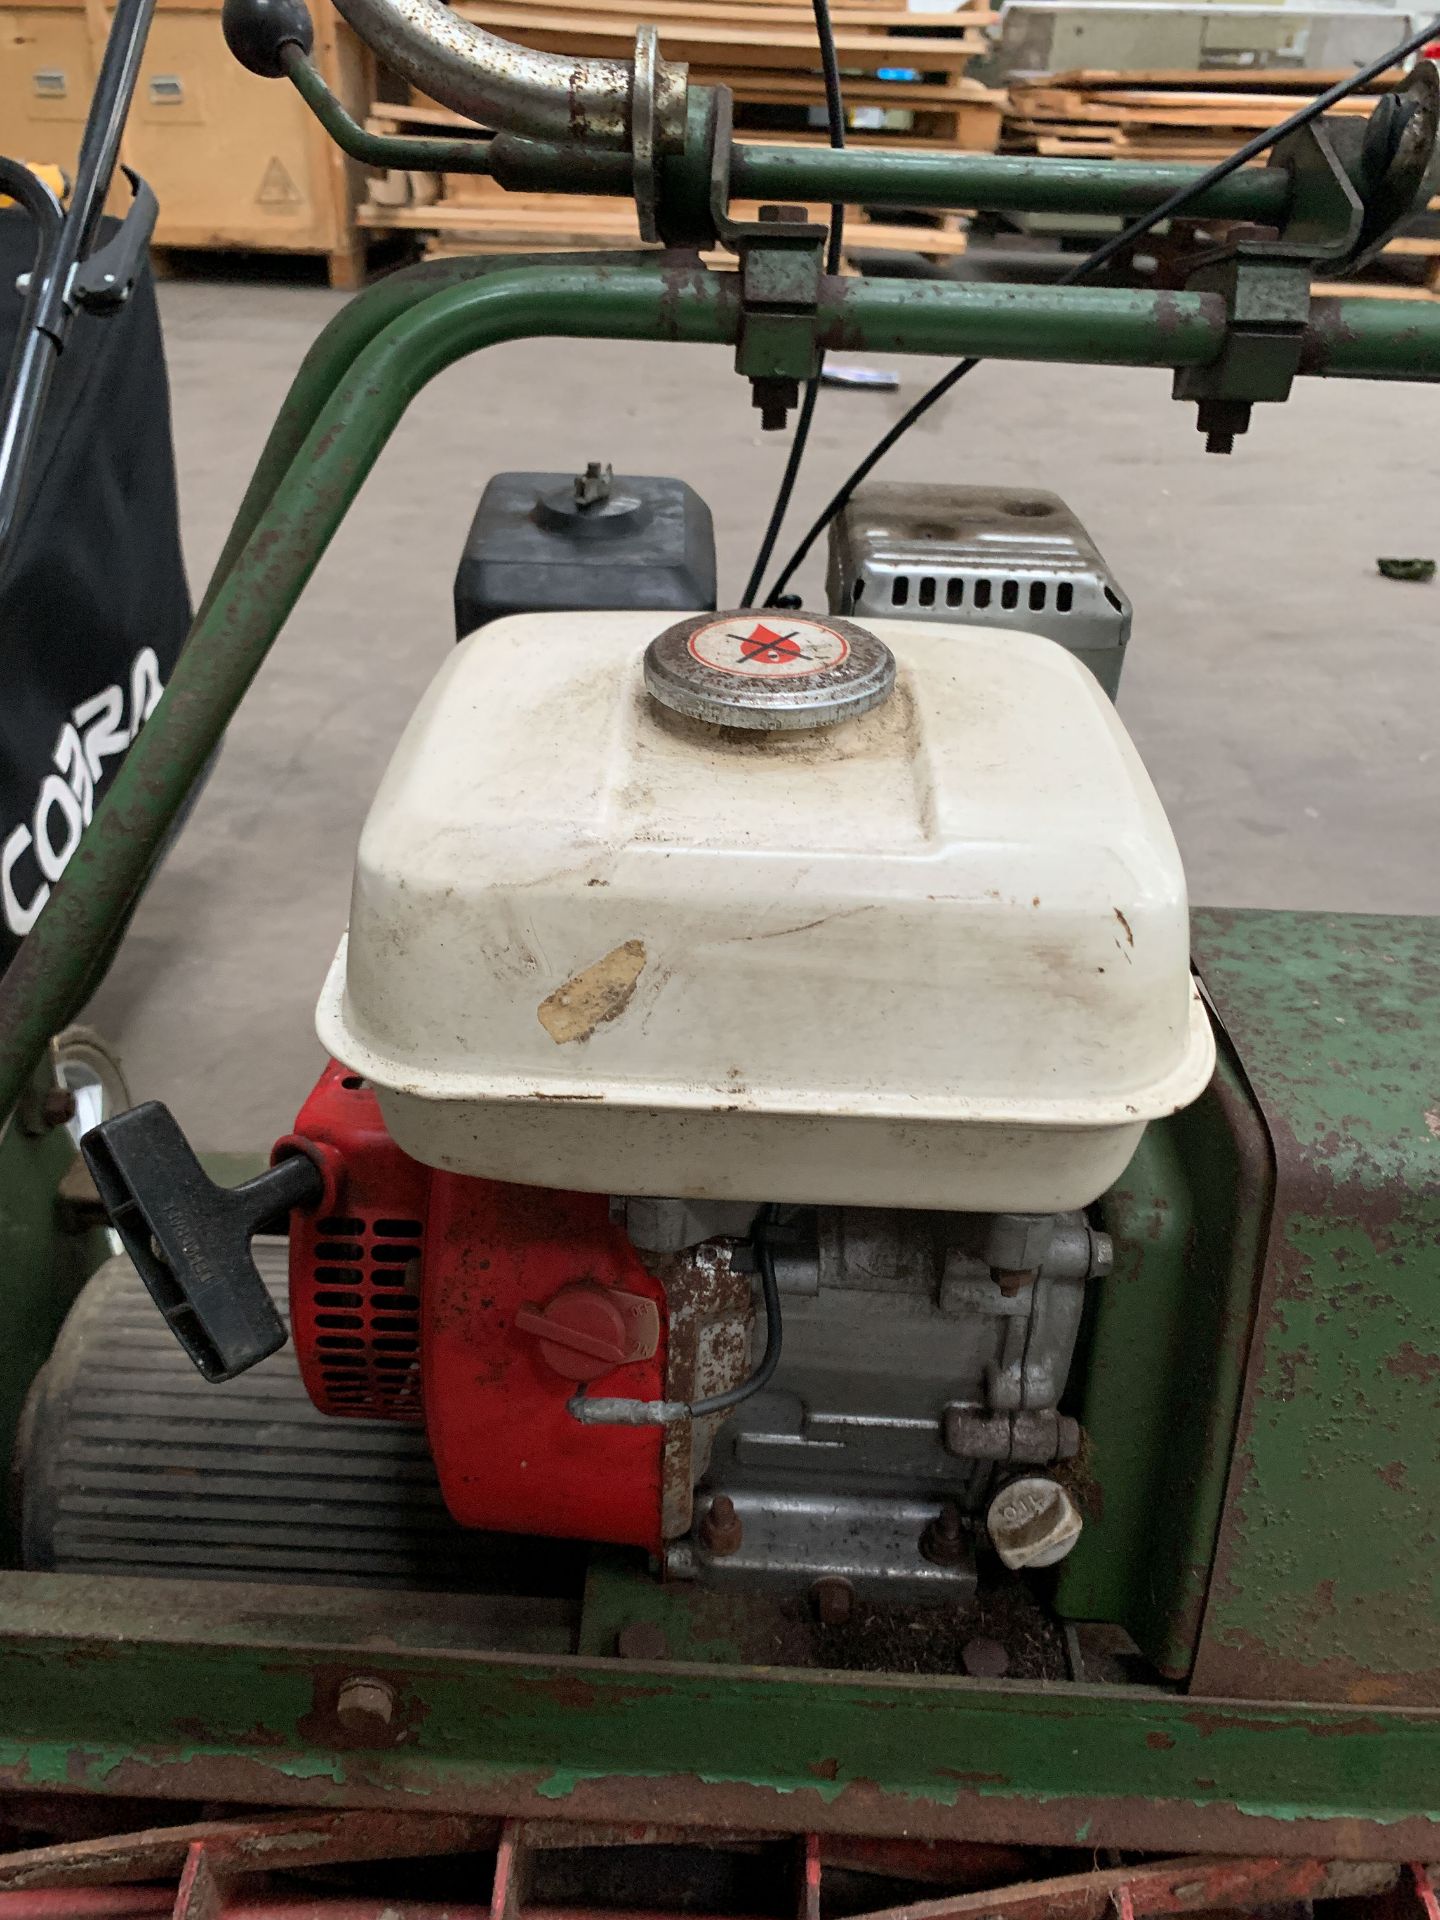 Atco 30" Cylinder Lawnmower with Honda 5.0Hp Engine (no box) - Image 3 of 3